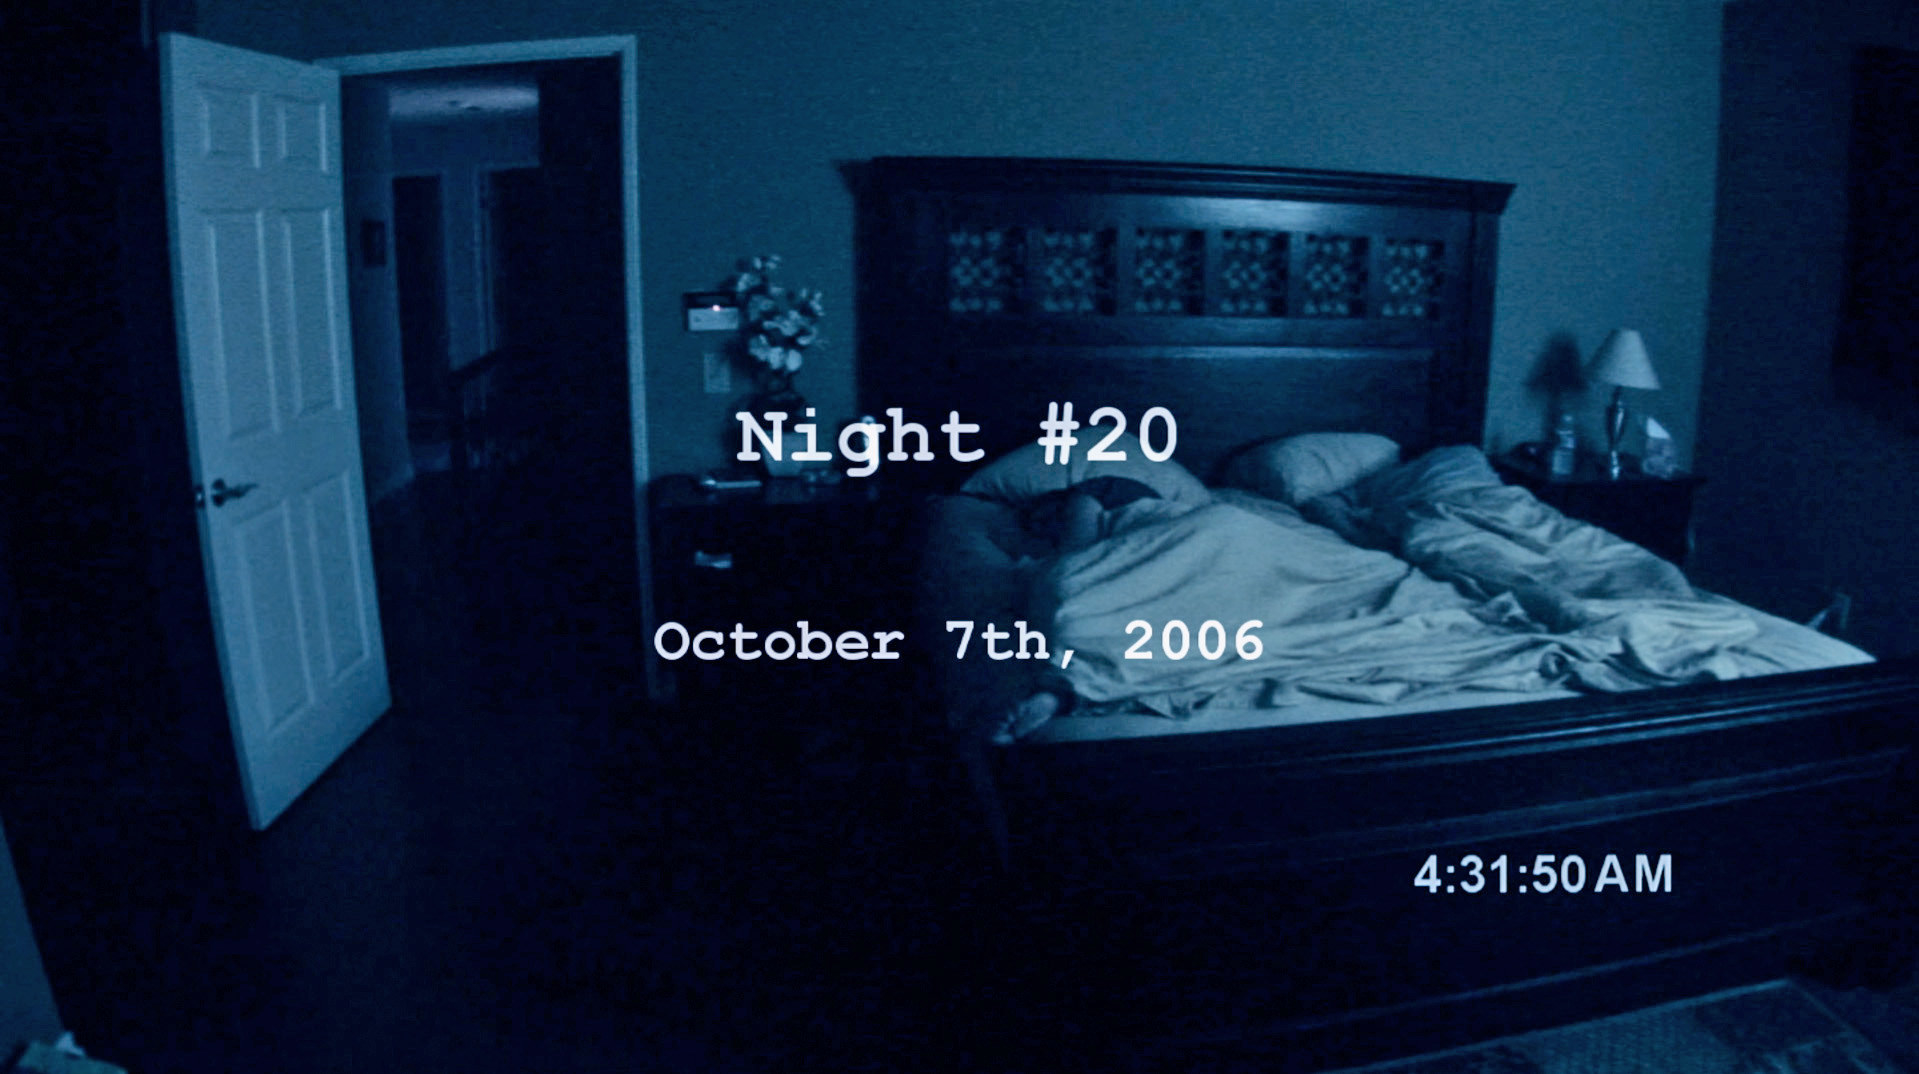 The beginning of a scene from the movie, labelled Night #20, Oct. 7th, 2006